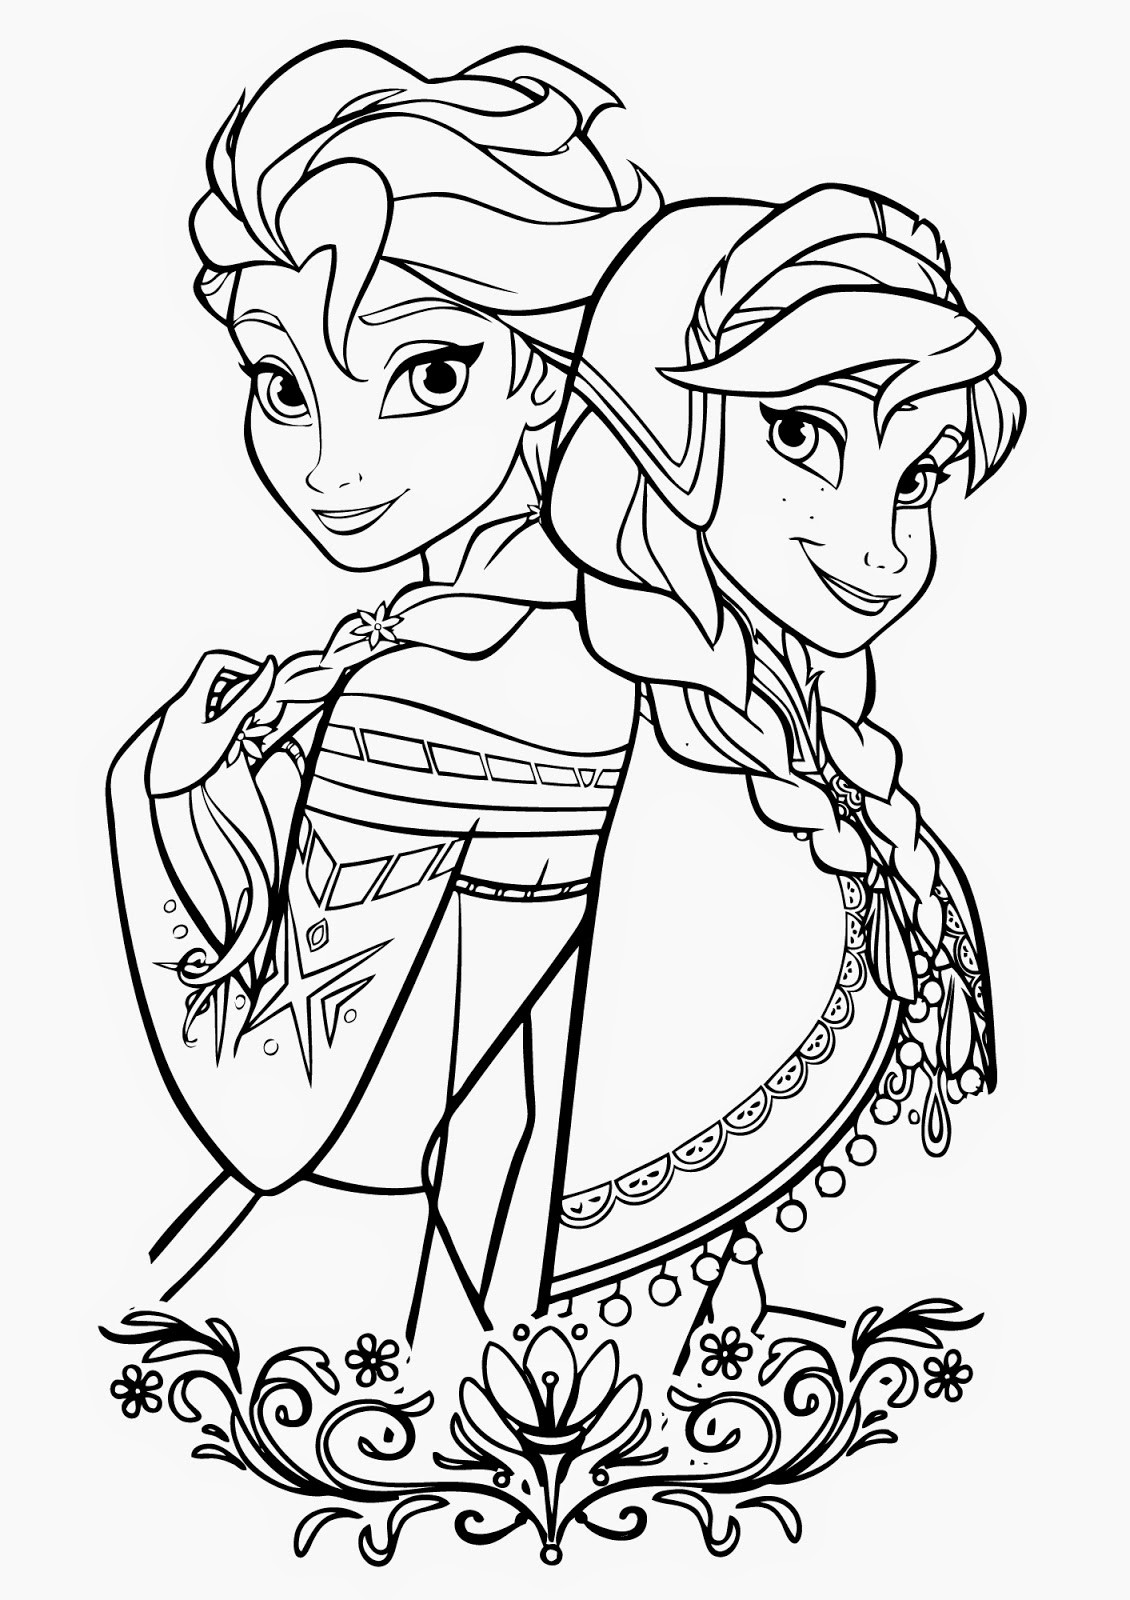 Printable Coloring Pages Frozen
 15 Beautiful Disney Frozen Coloring Pages Free Instant